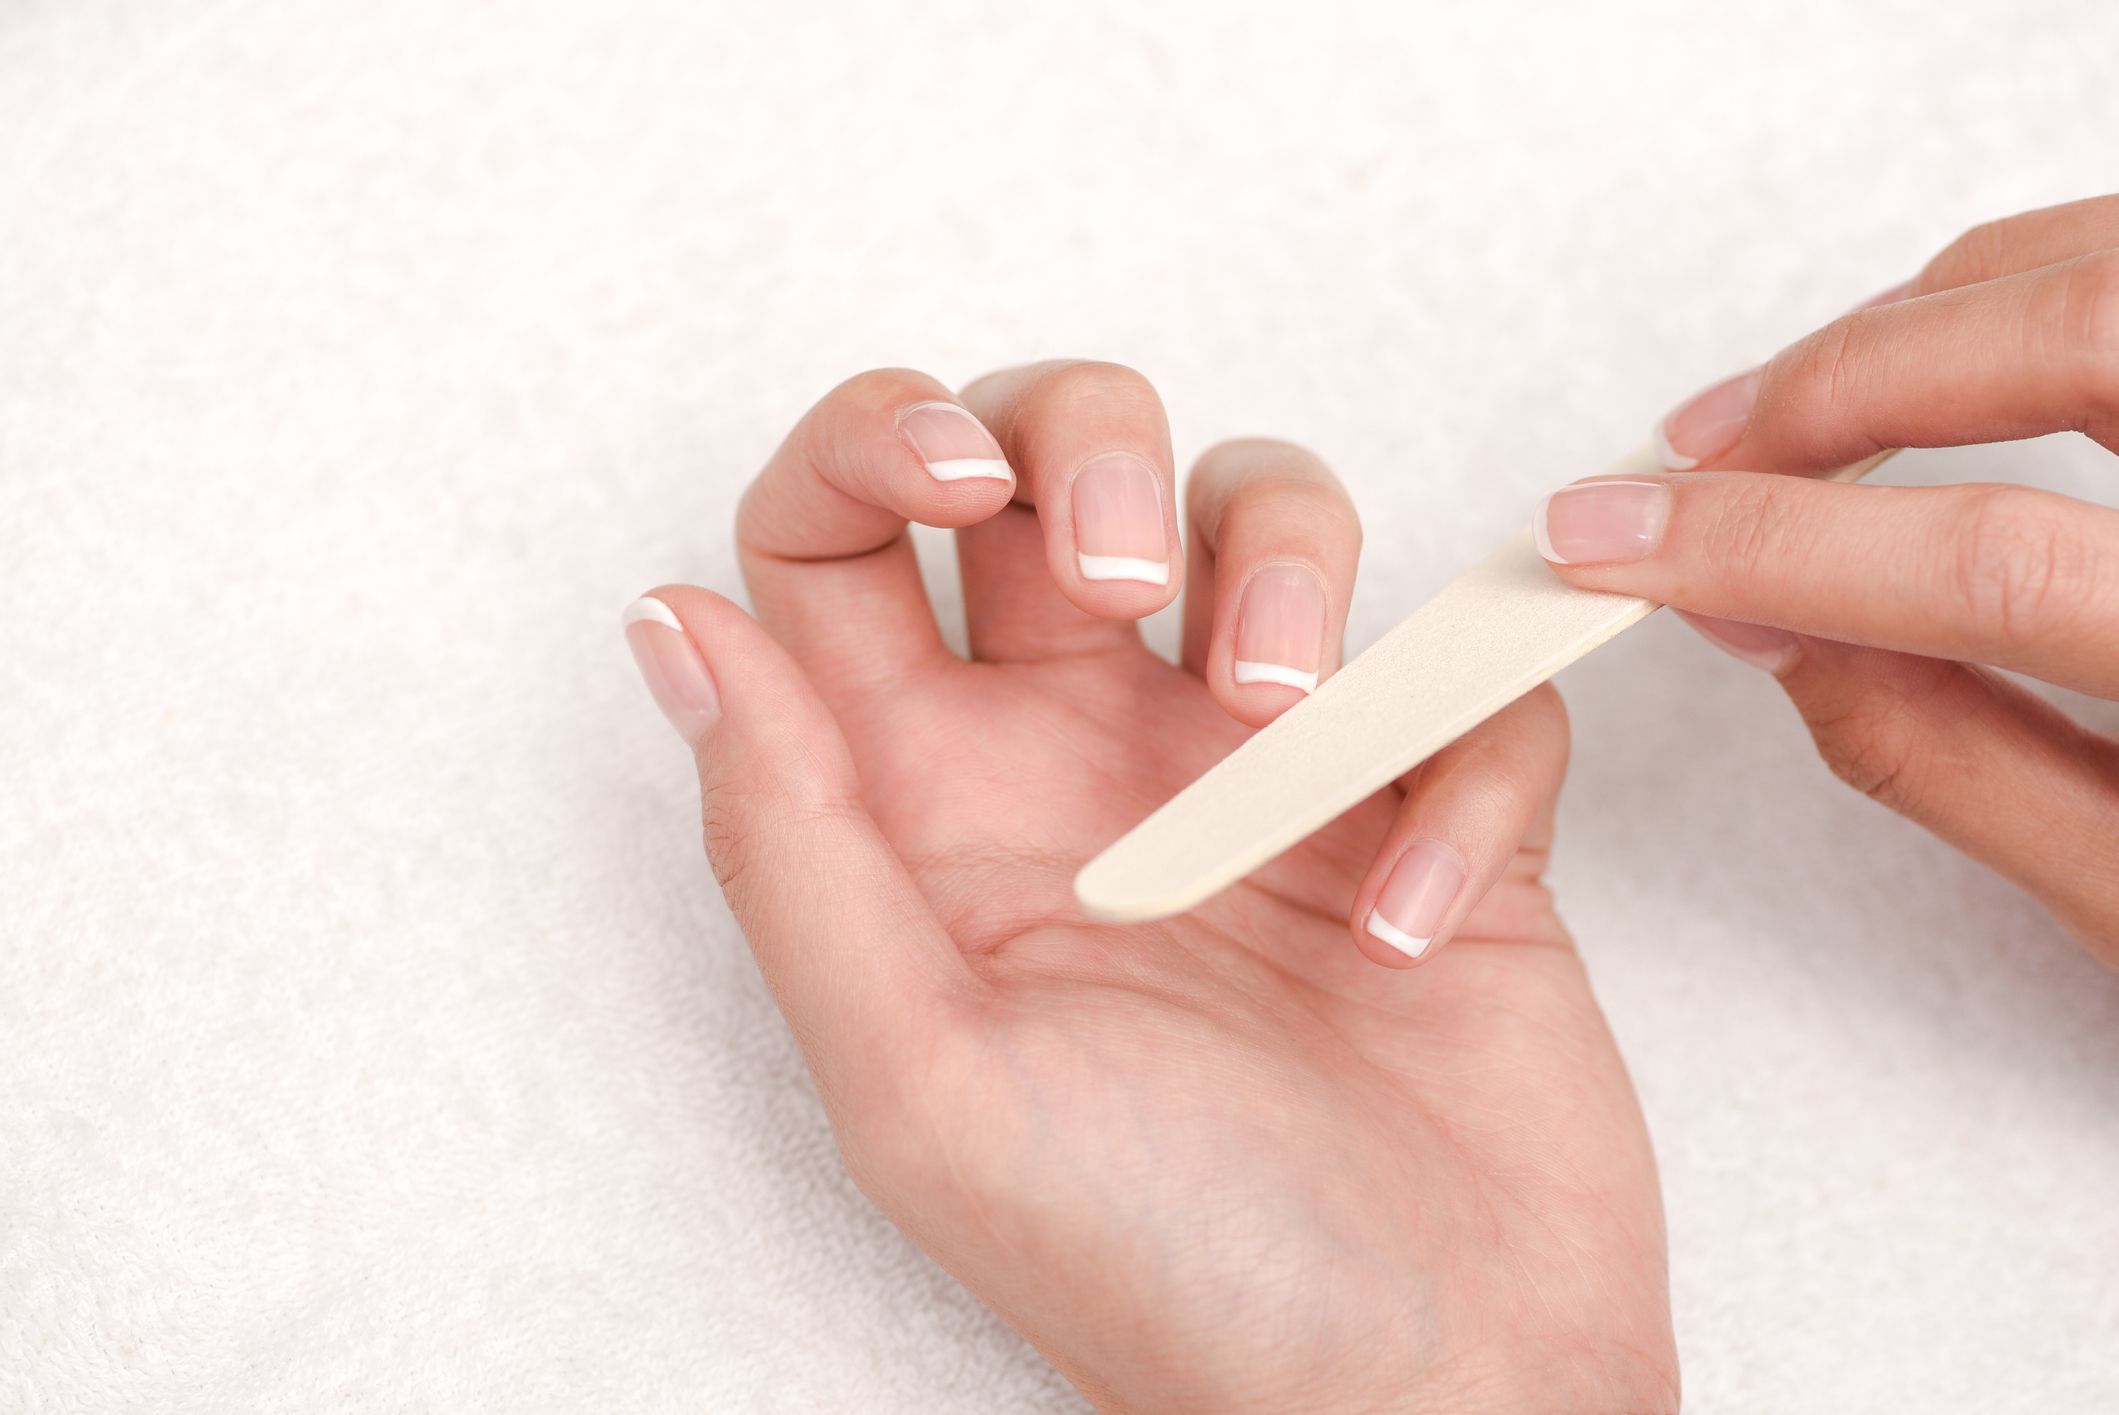 3 Home Remedies To Keep Your Nails Beautiful And Shiny